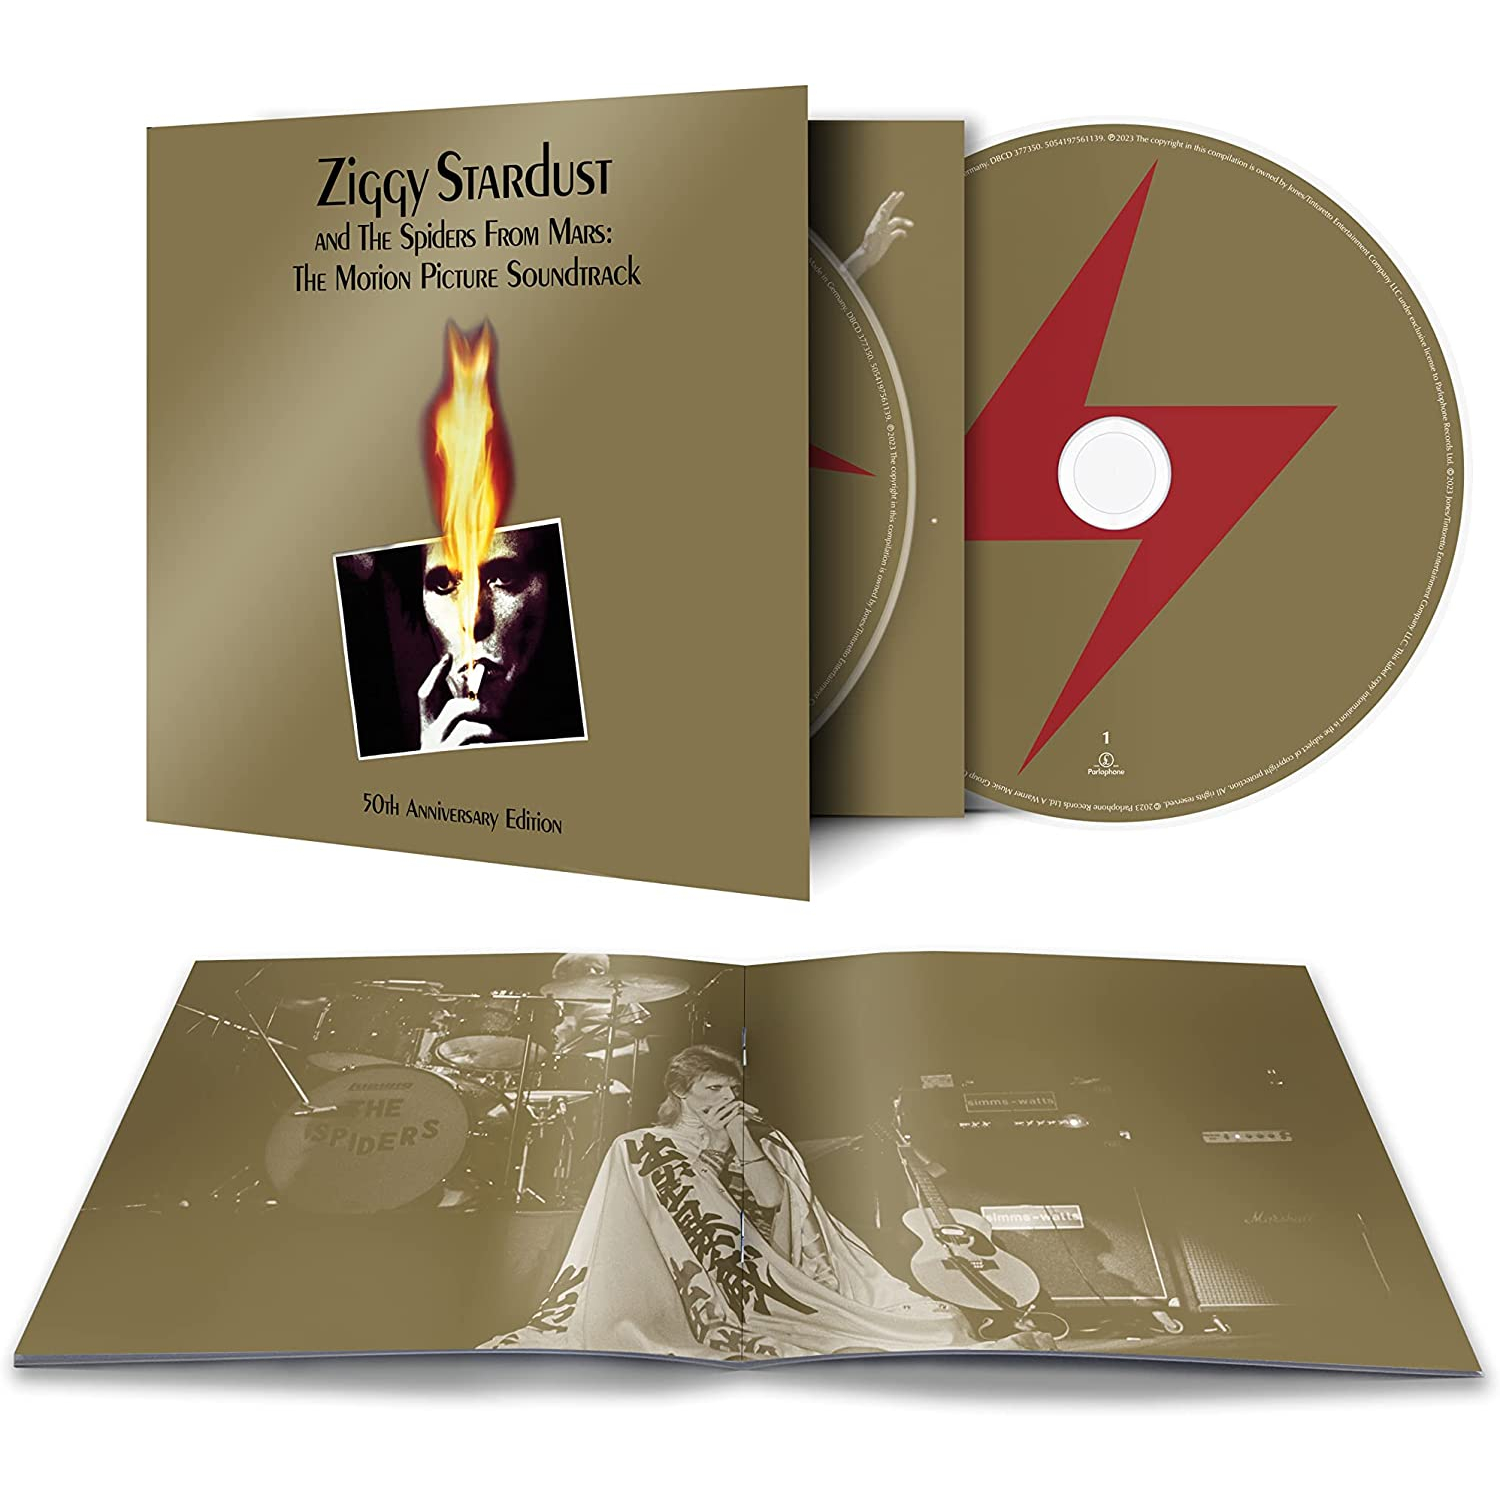 BOWIE DAVID - Ziggy Stardust And The Spiders From Mars: 50th Anniversary Edition